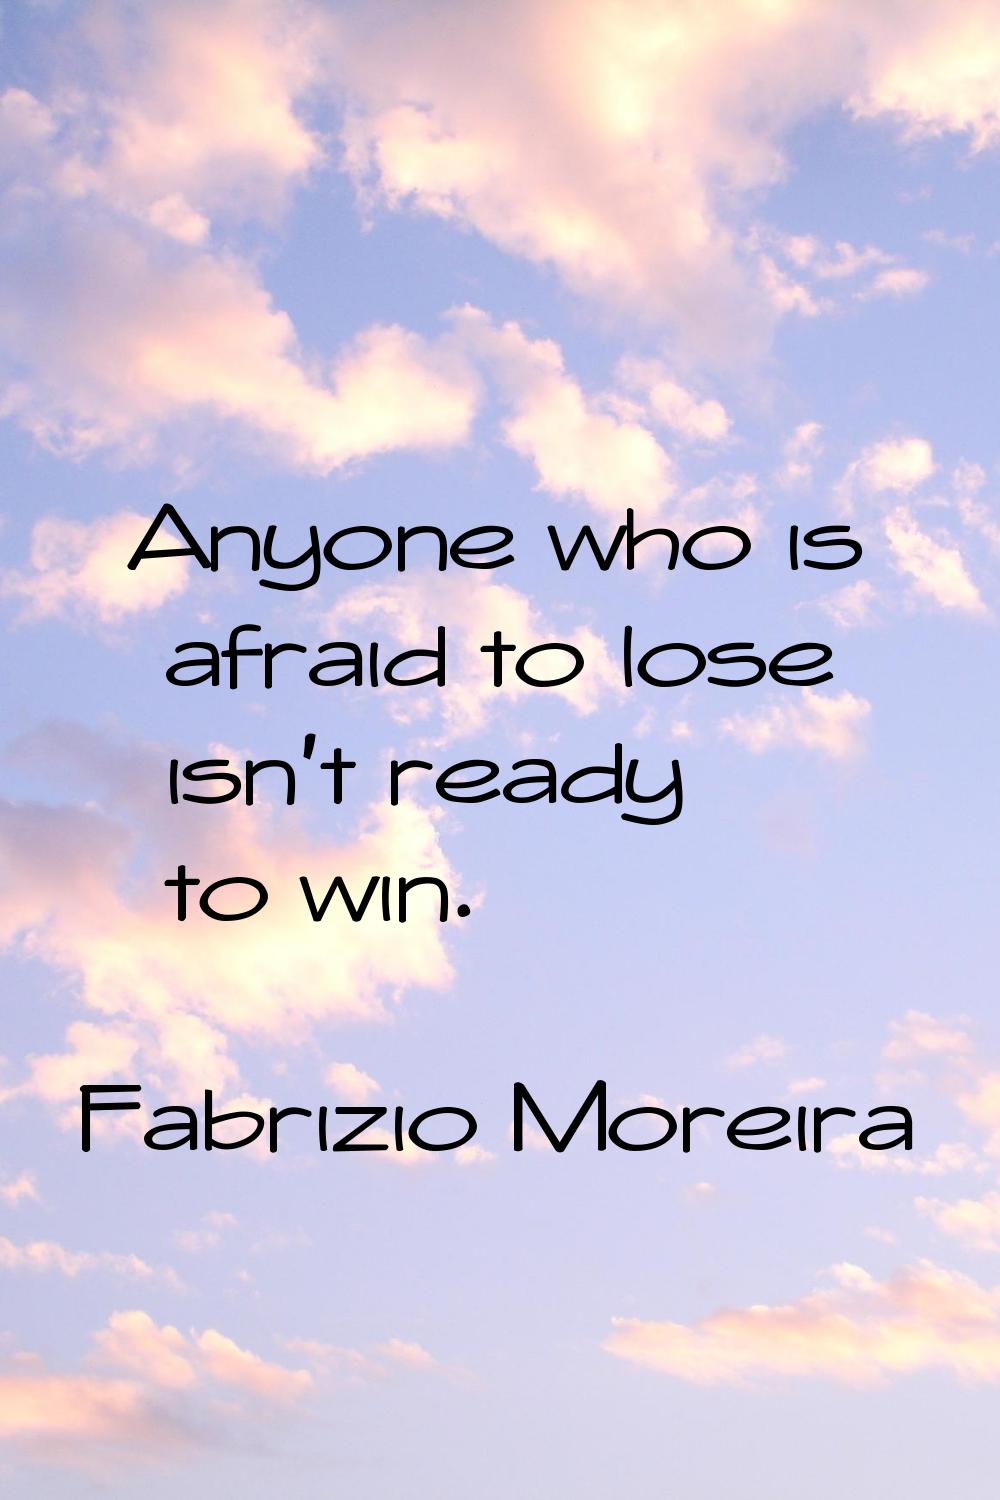 Anyone who is afraid to lose isn't ready to win.